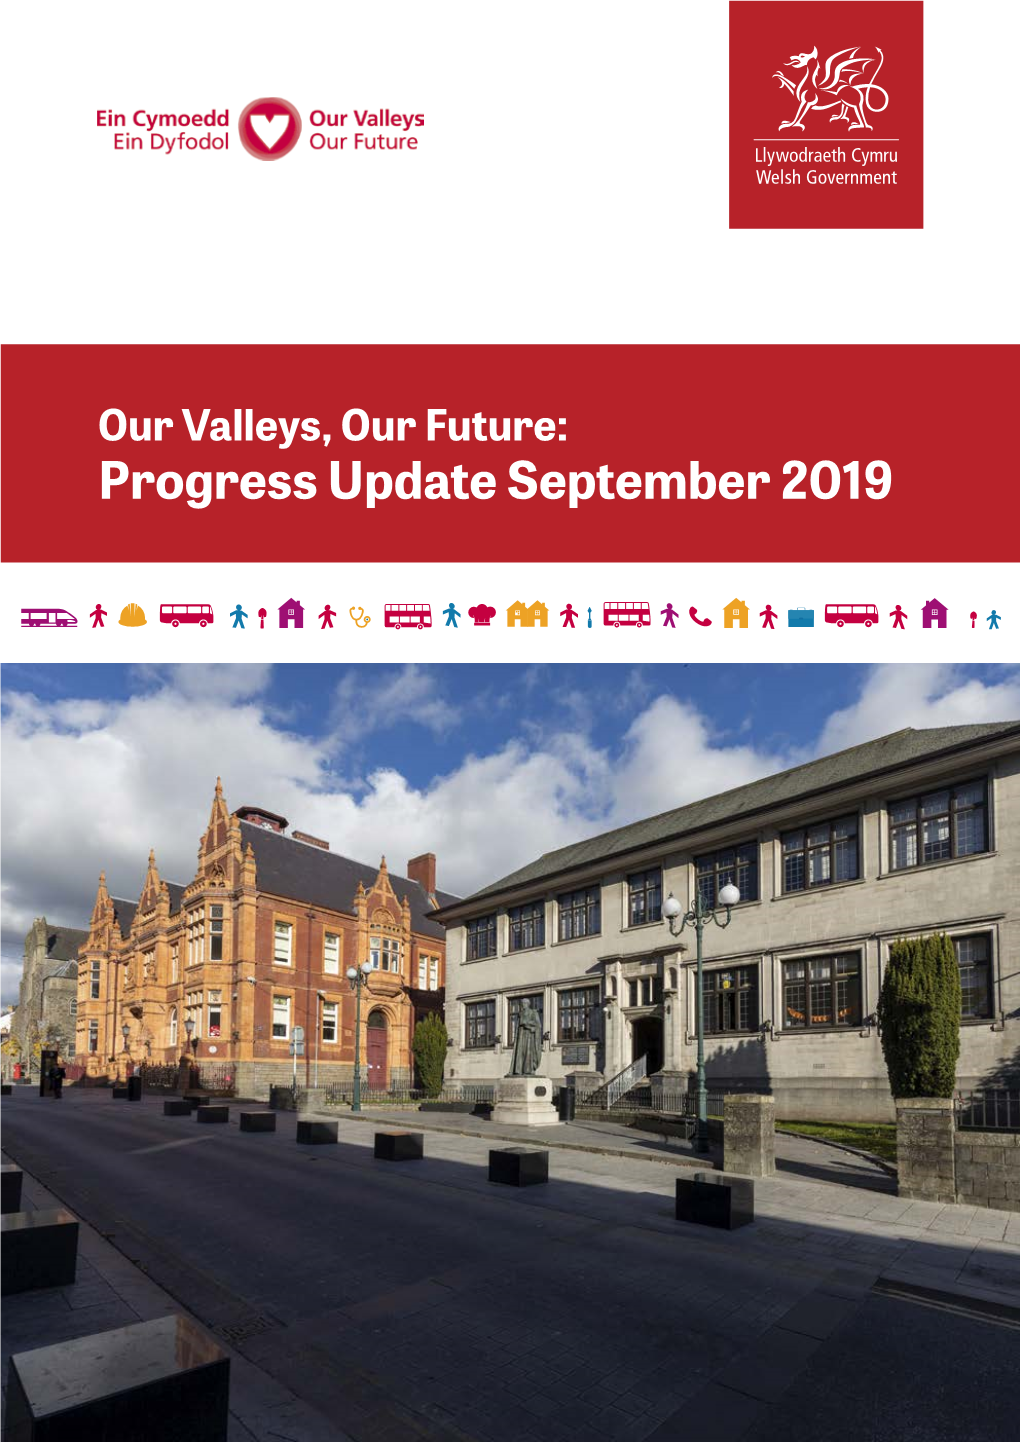 Our Valleys, Our Future: Progress Update September 2019